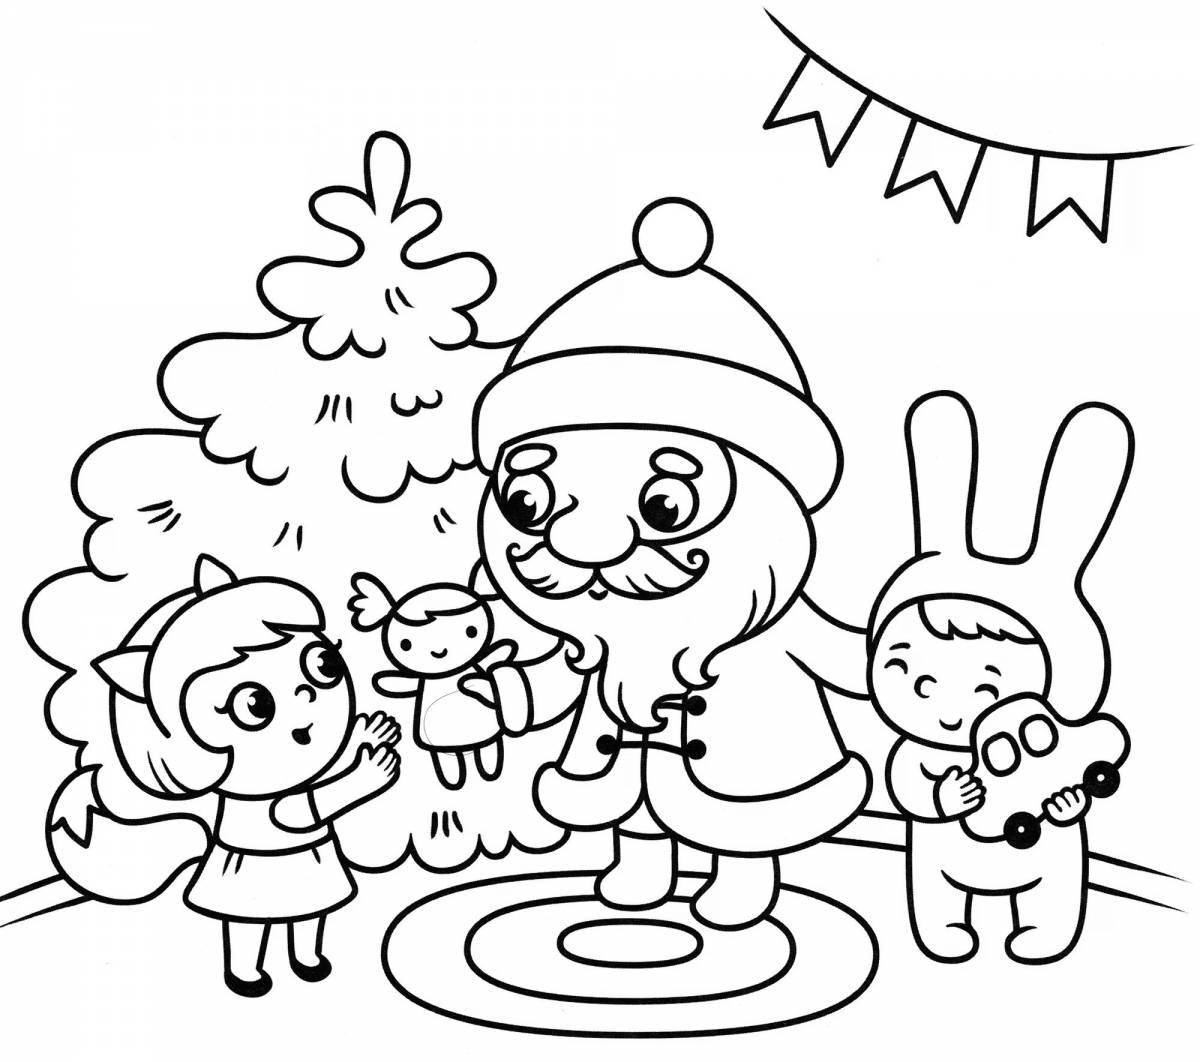 Santa's holiday coloring book for kids 2-3 years old